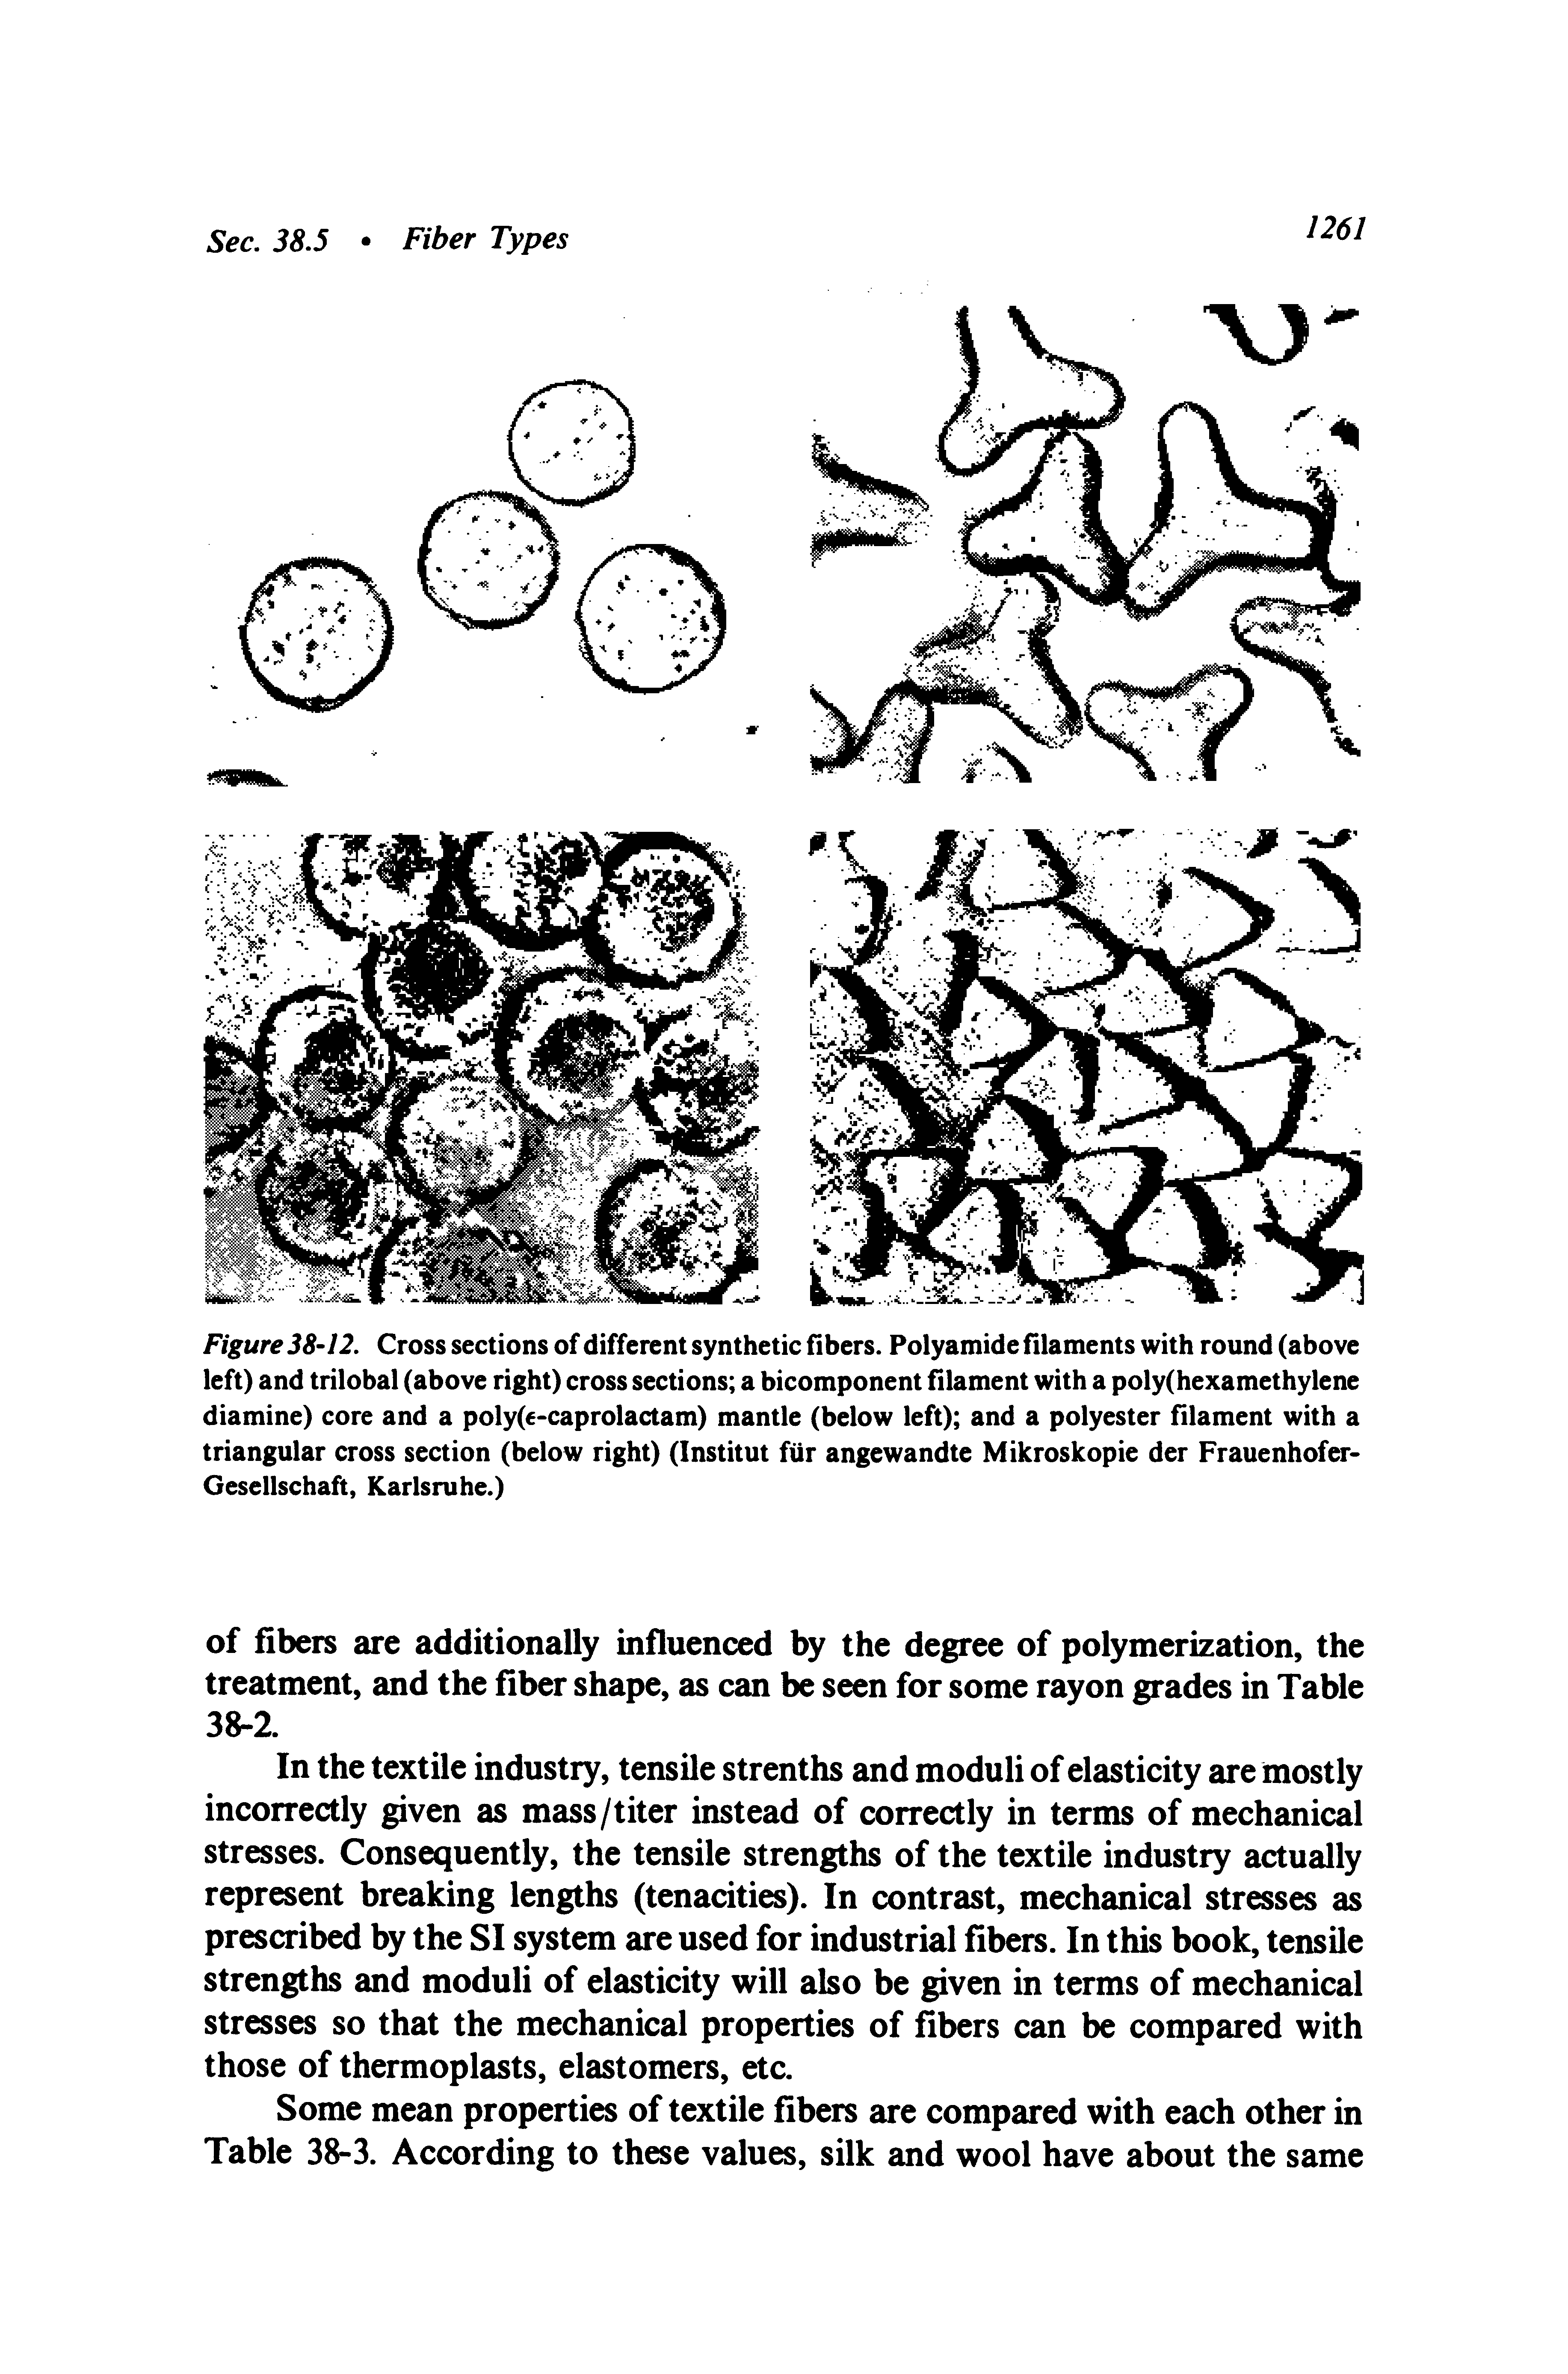 Figure 38-12. Cross sections of diflerent synthetic fibers. Polyamide filaments with round (above left) and trilobal (above right) cross sections a bicomponent filament with a poly(hexamethylene diamine) core and a poly(e-caprolactam) mantle (below left) and a polyester filament with a triangular cross section (below right) (Institut fiir angewandte Mikroskopie der Frauenhofer-Gesellschaft, Karlsruhe.)...